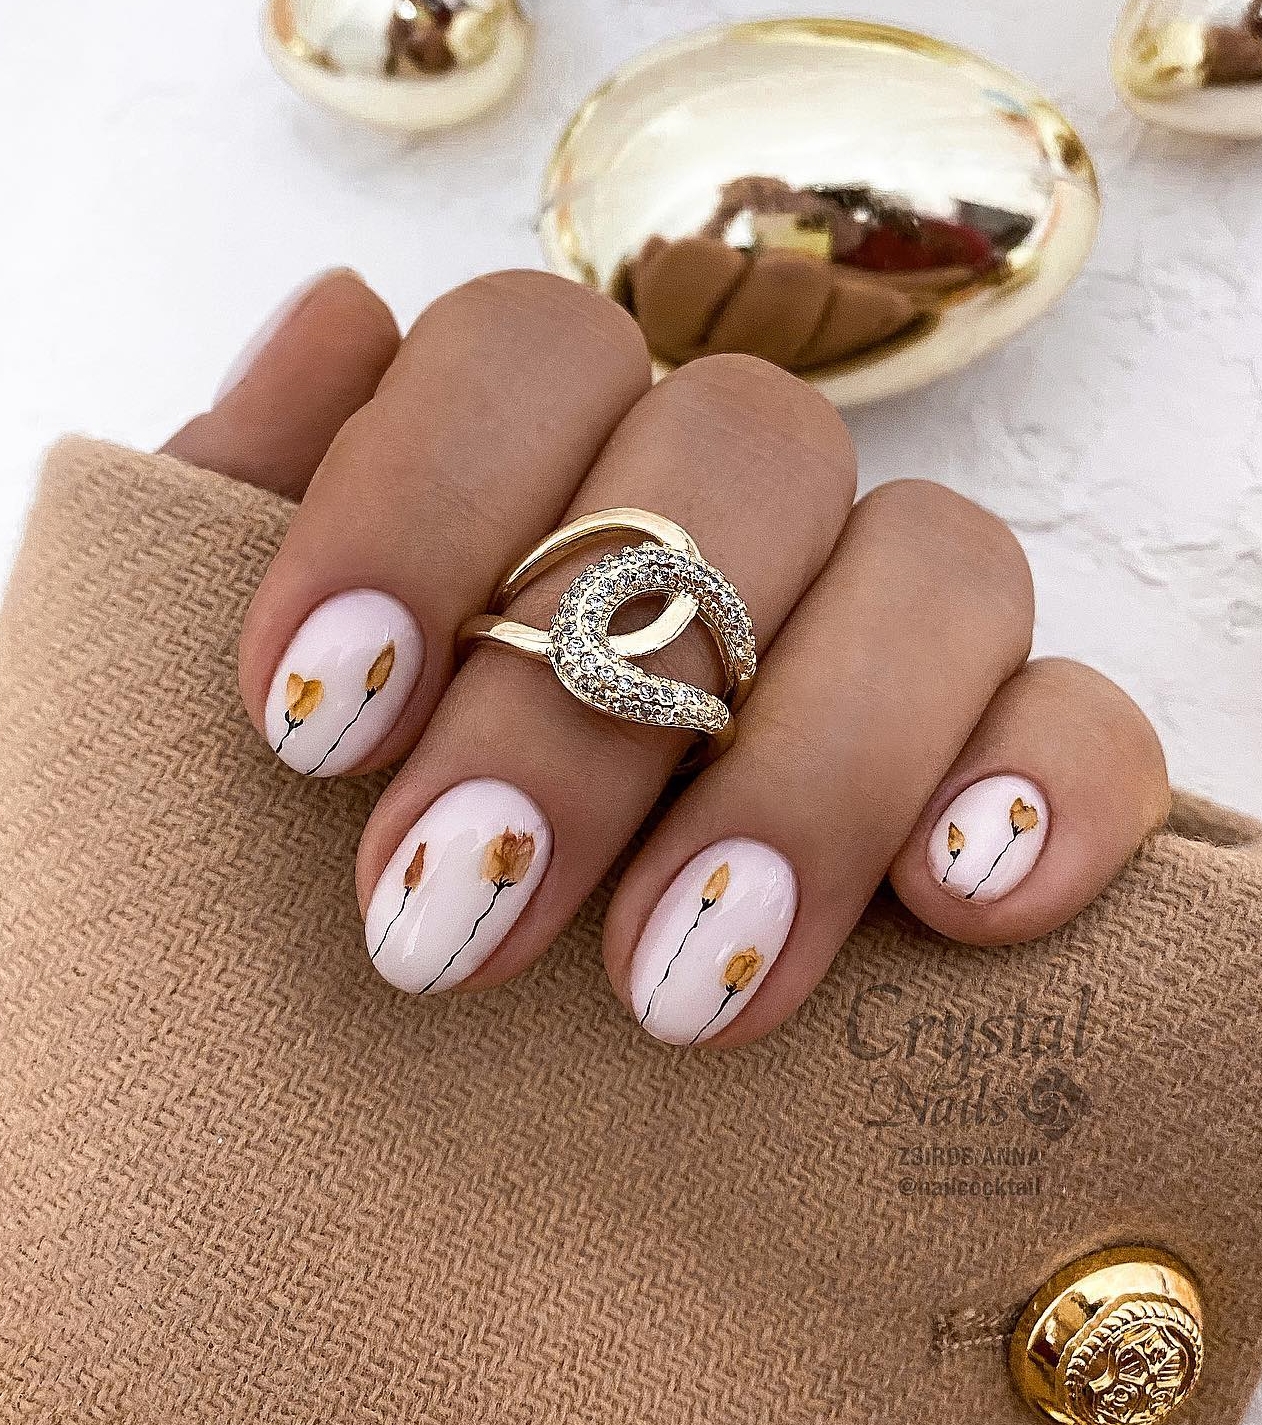 Short Round Nails with Flowers